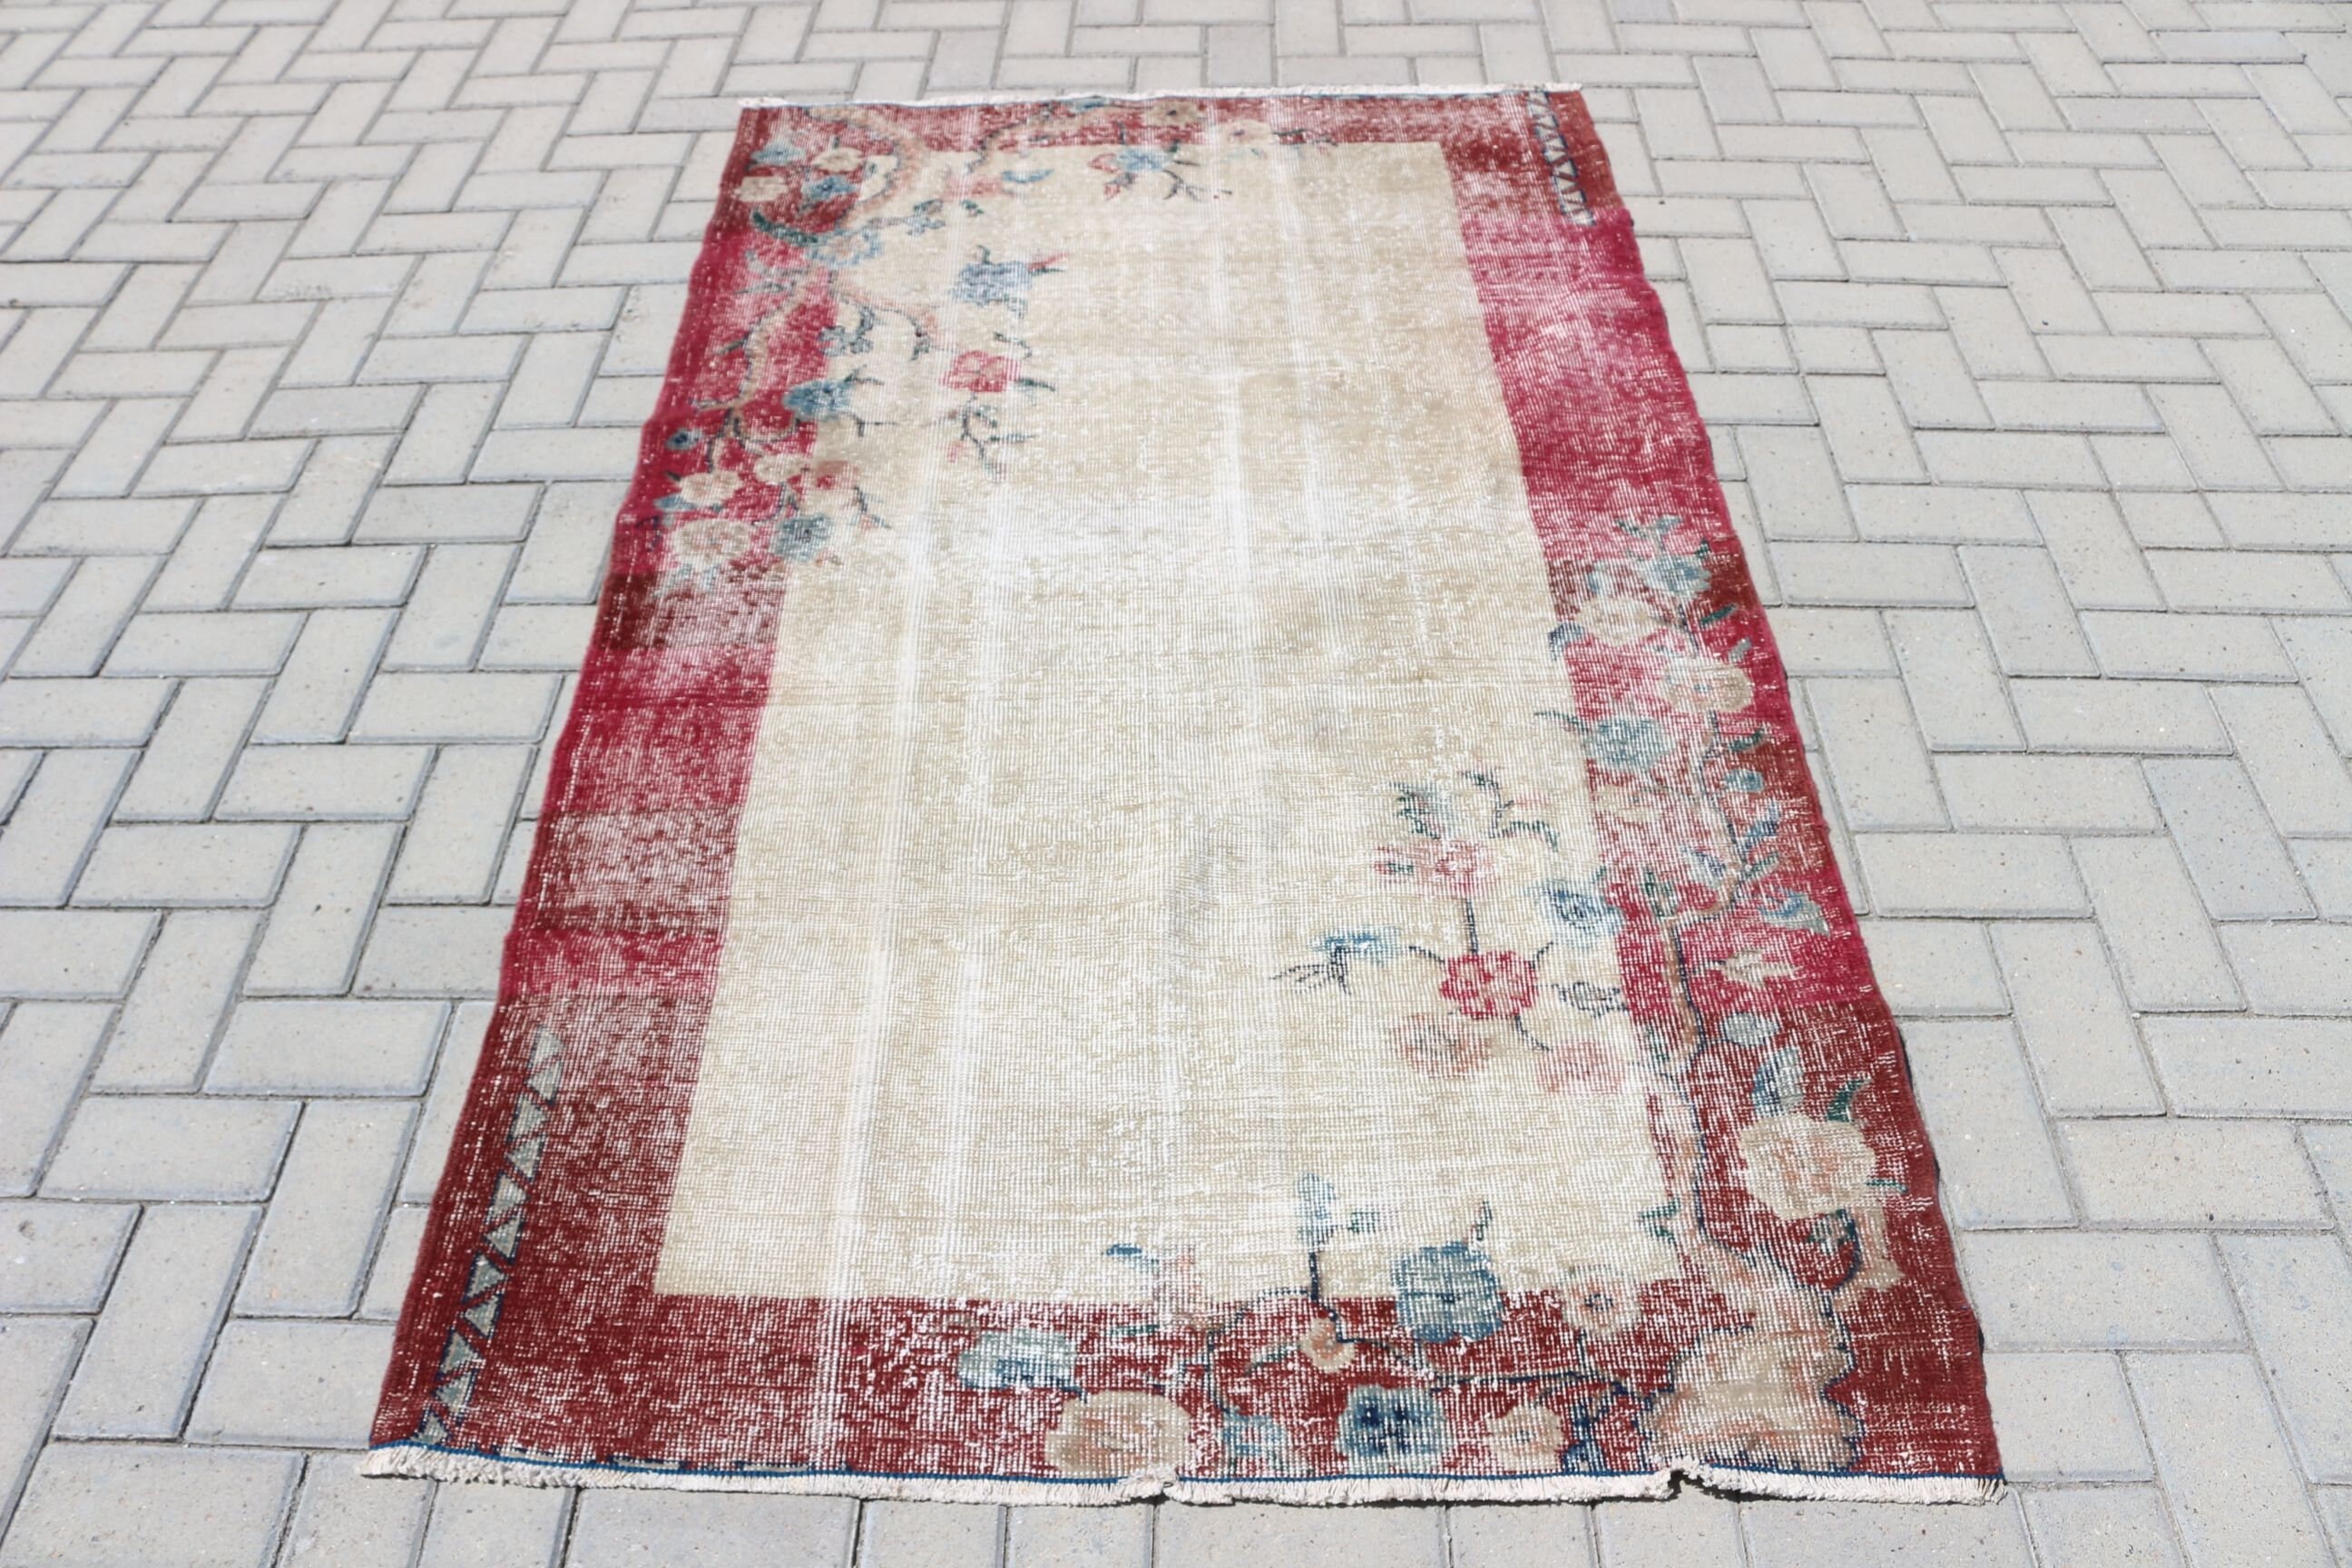 Rugs for Kitchen, Kitchen Rugs, 3.8x6.6 ft Area Rugs, Red Cool Rugs, Nursery Rugs, Turkish Rugs, Floor Rugs, Vintage Rug